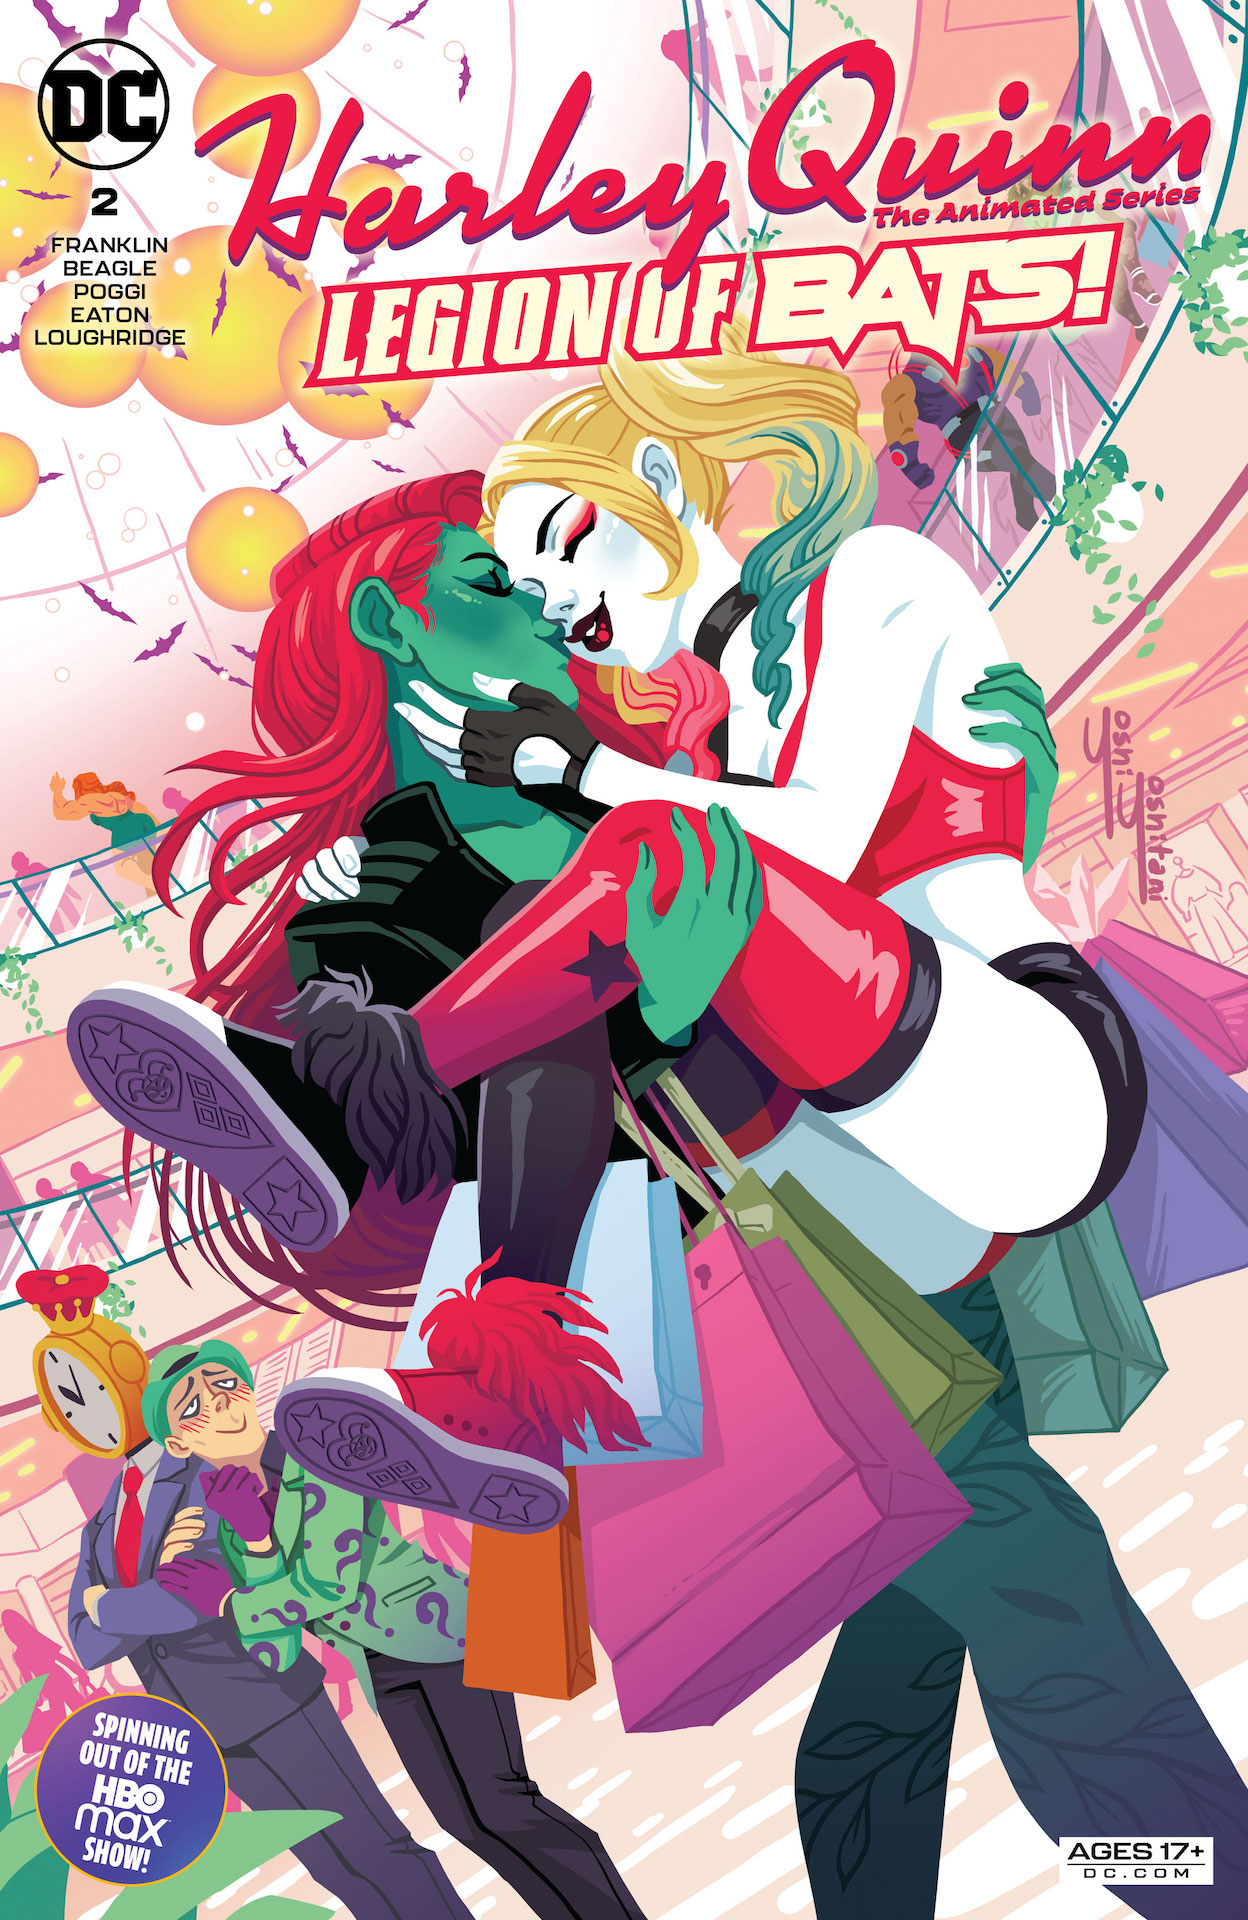 DC Preview: Harley Quinn: The Animated Series - Legion of Bats! #2